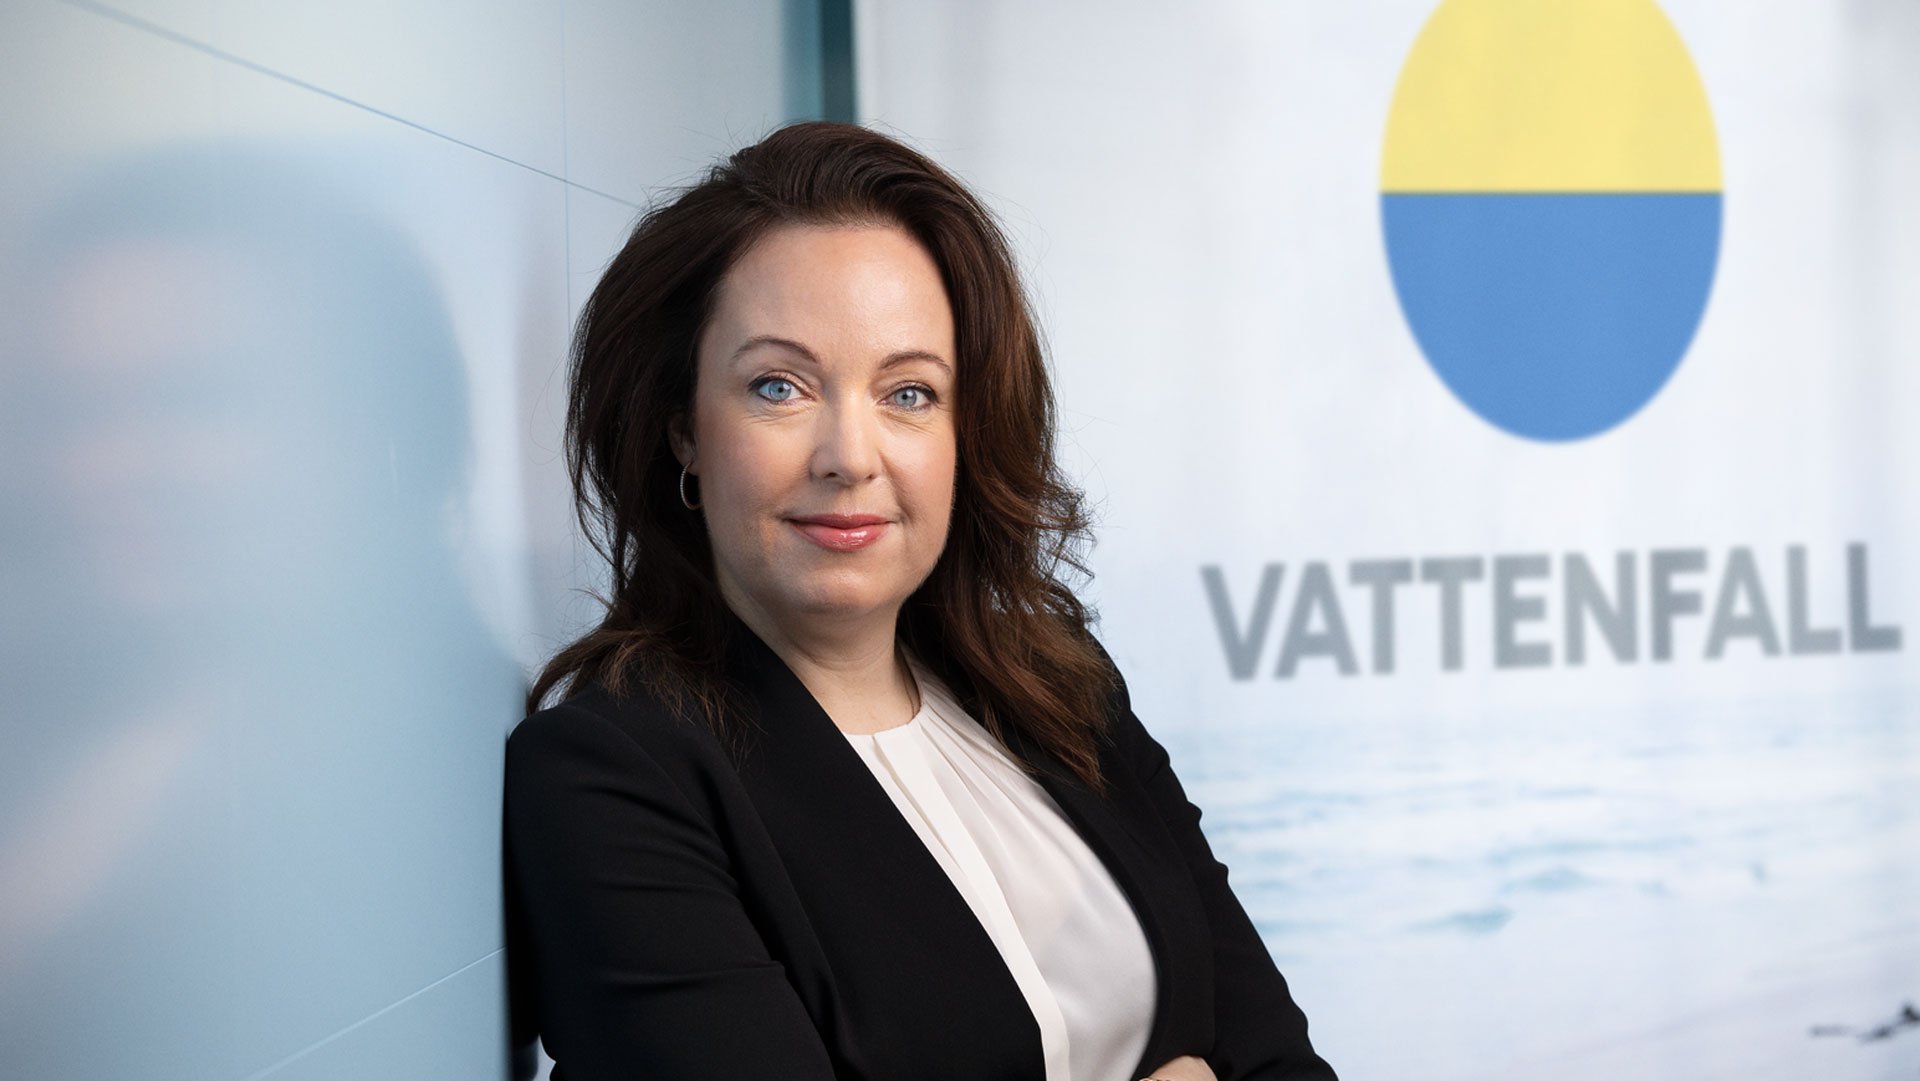 vattenfall master thesis